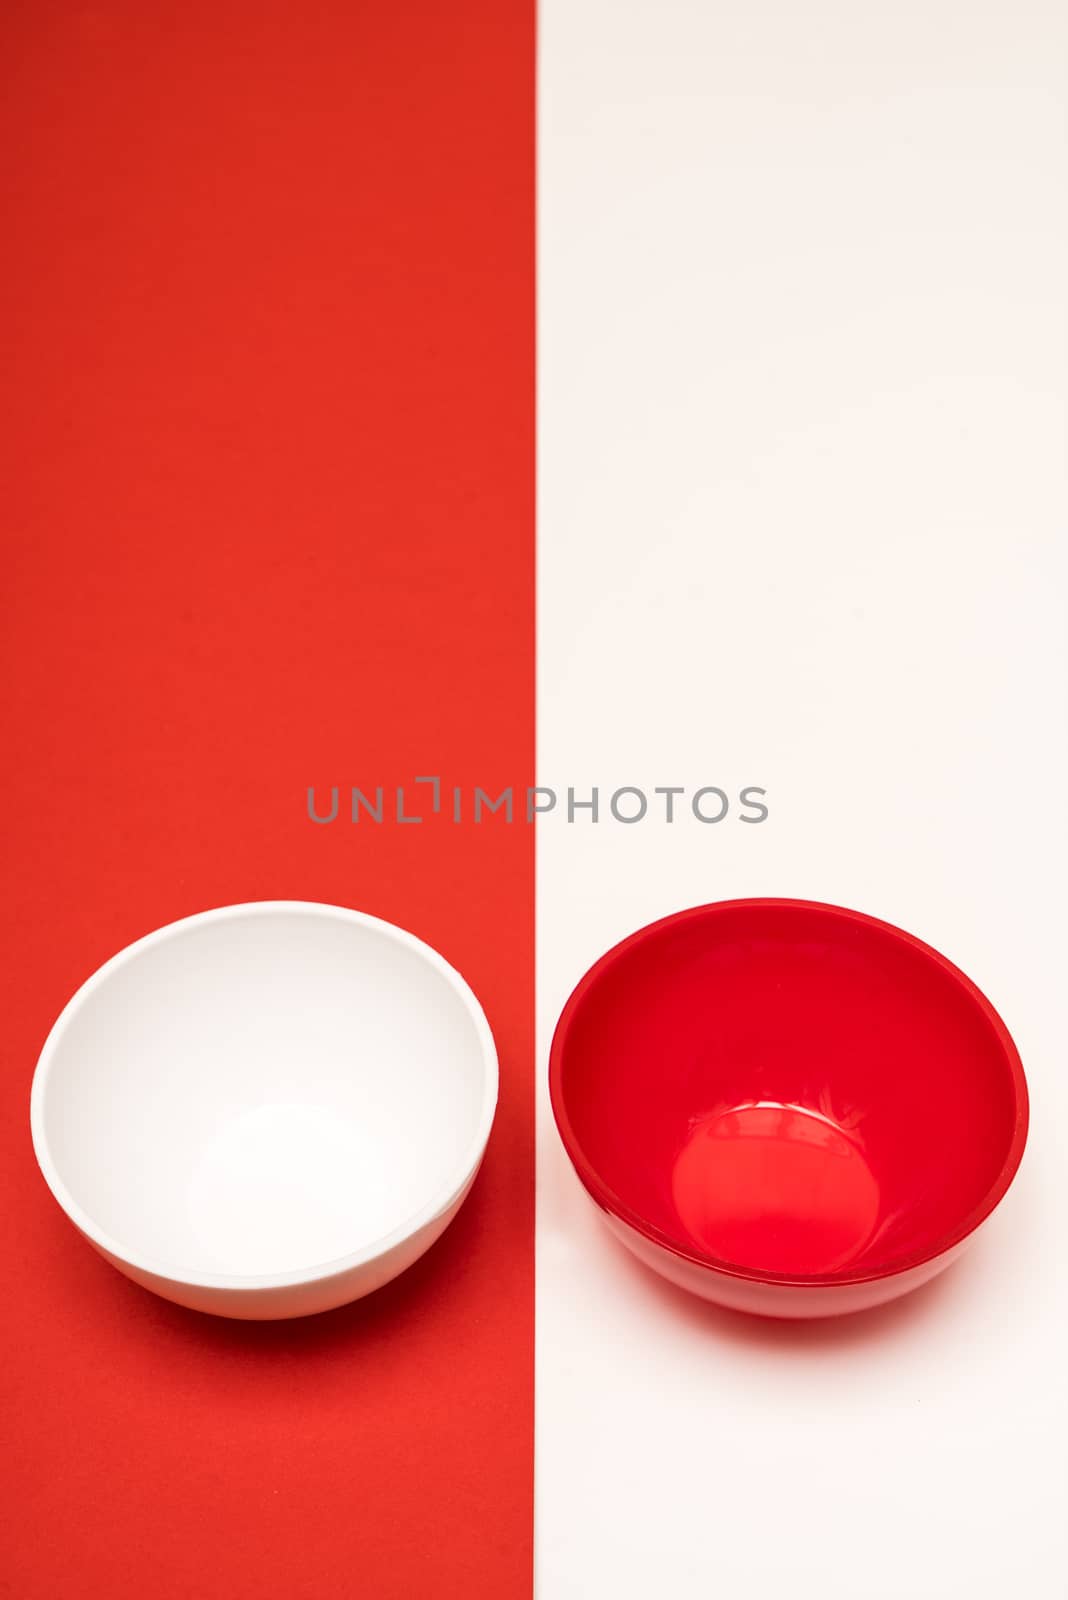 red and white bowls arranged opposite each other on a colored background